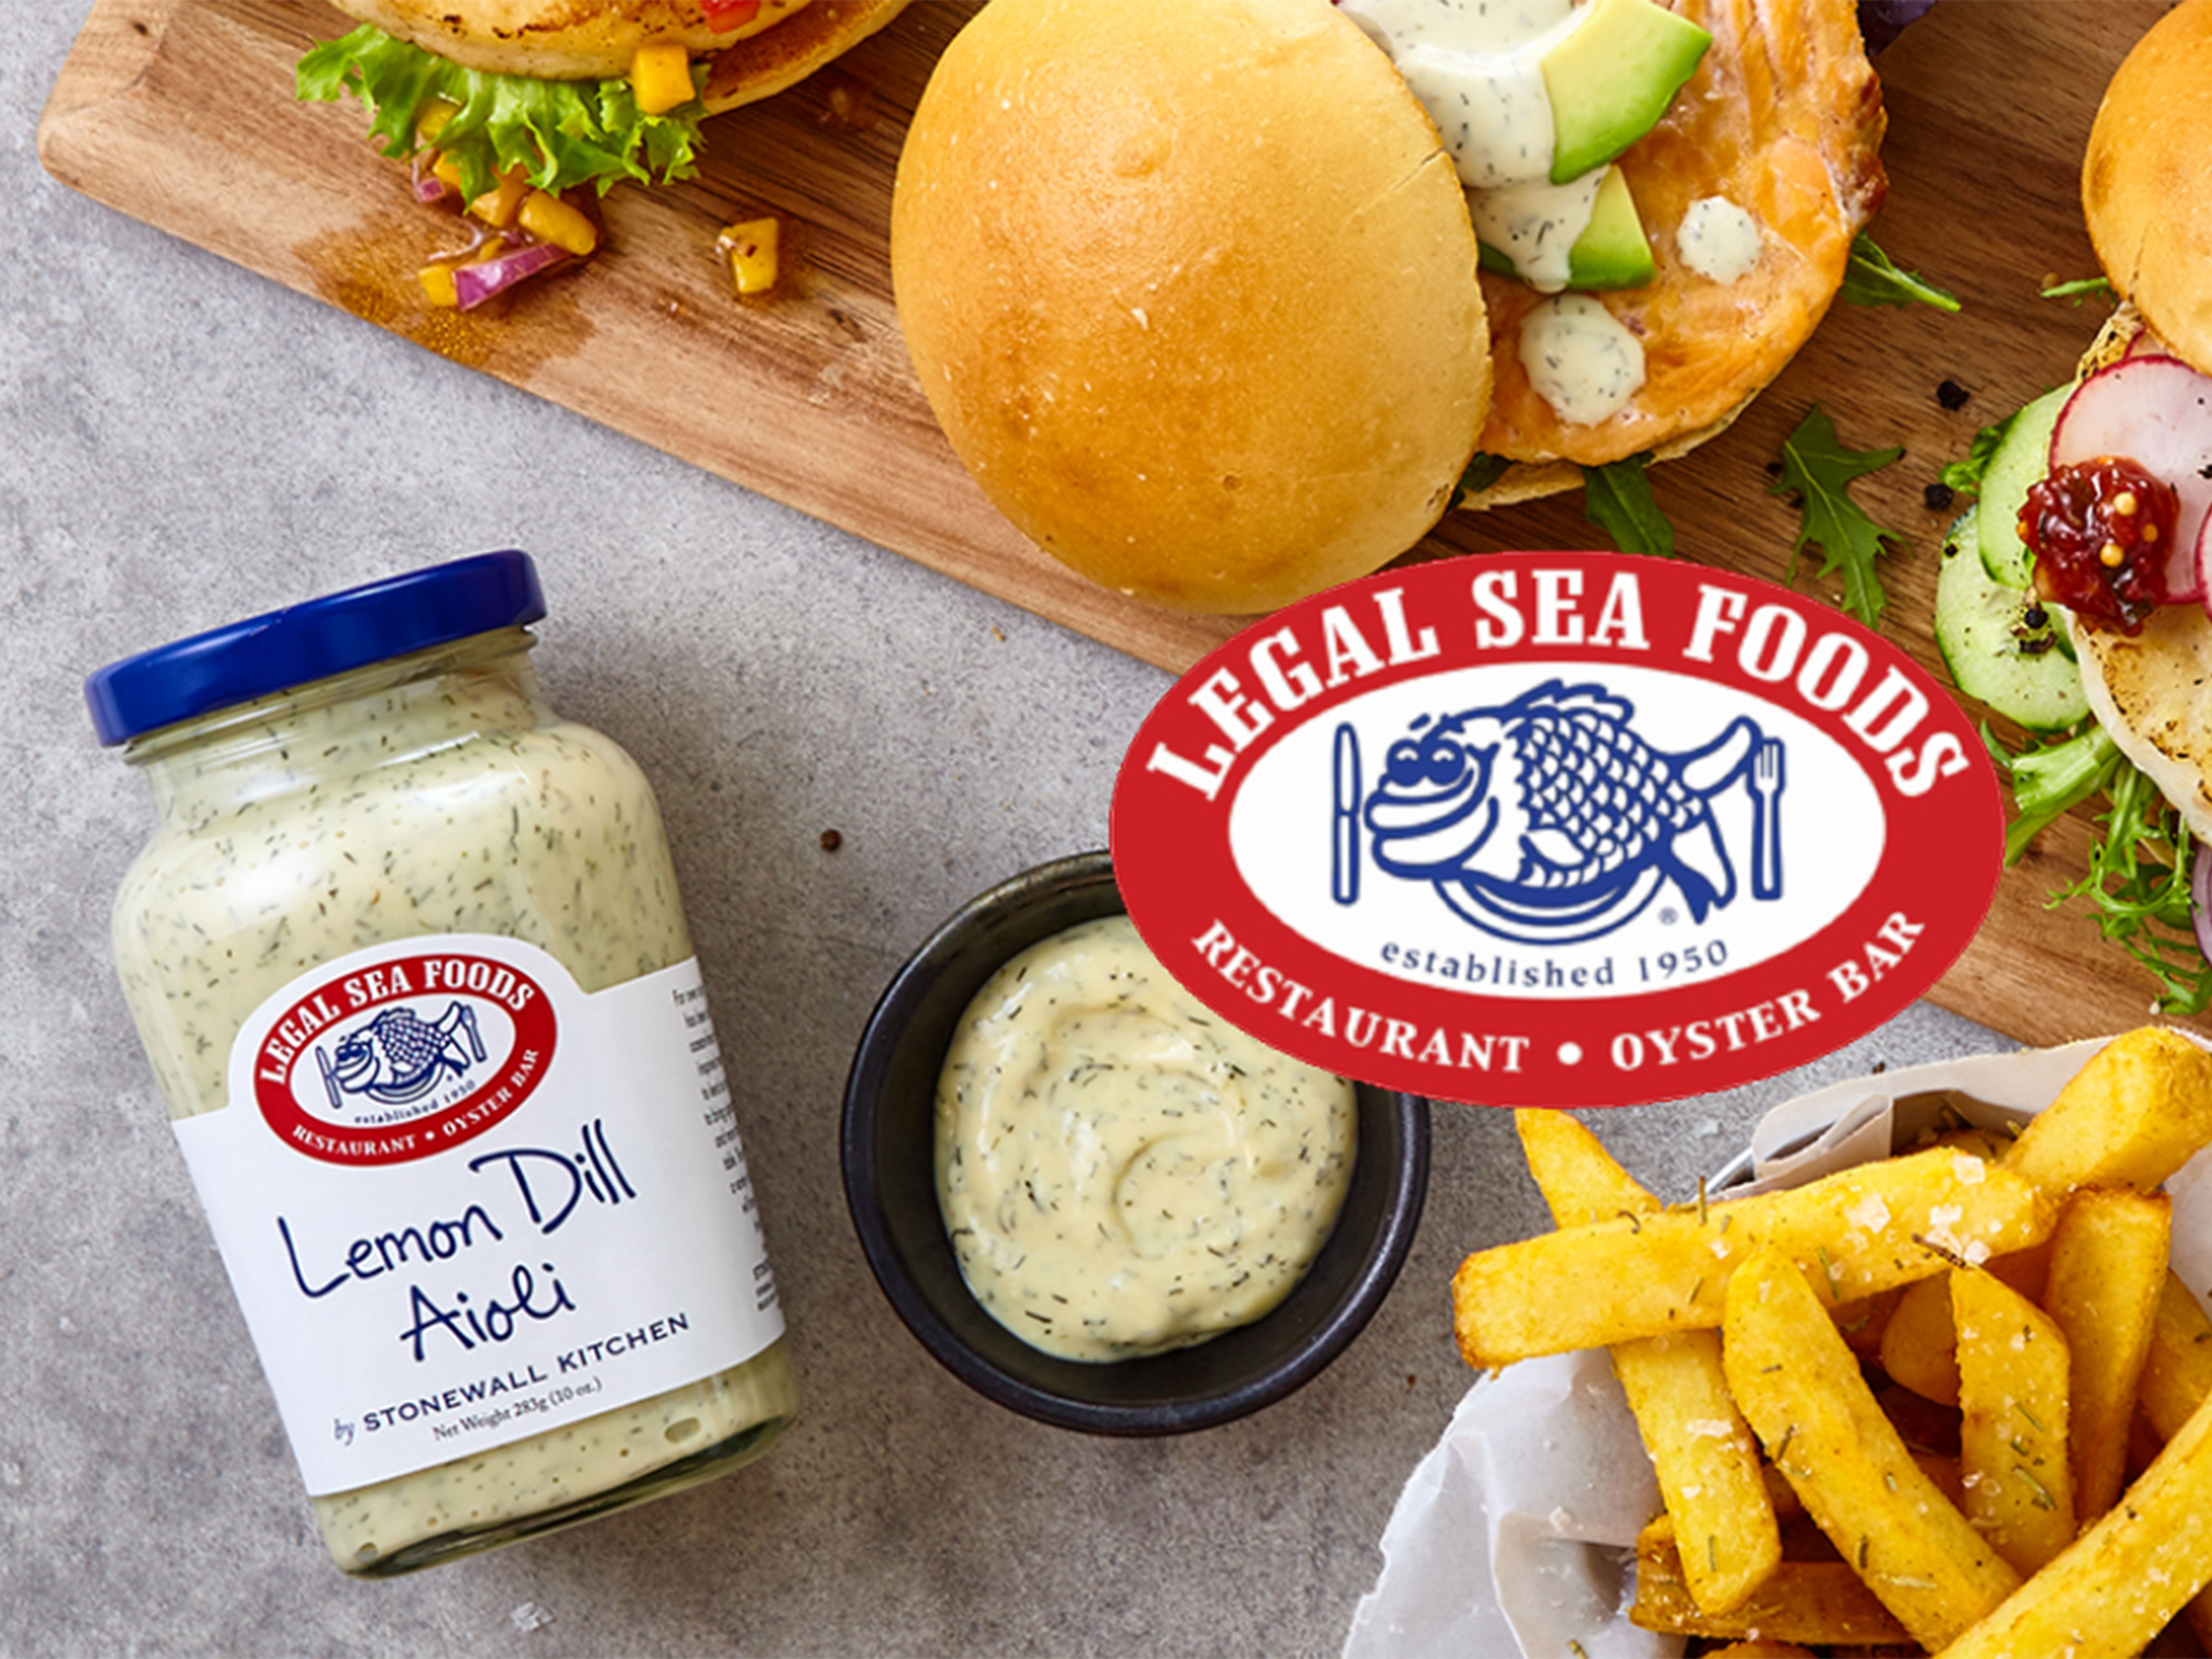 Legal Sea Foods by Stonewall Kitchen